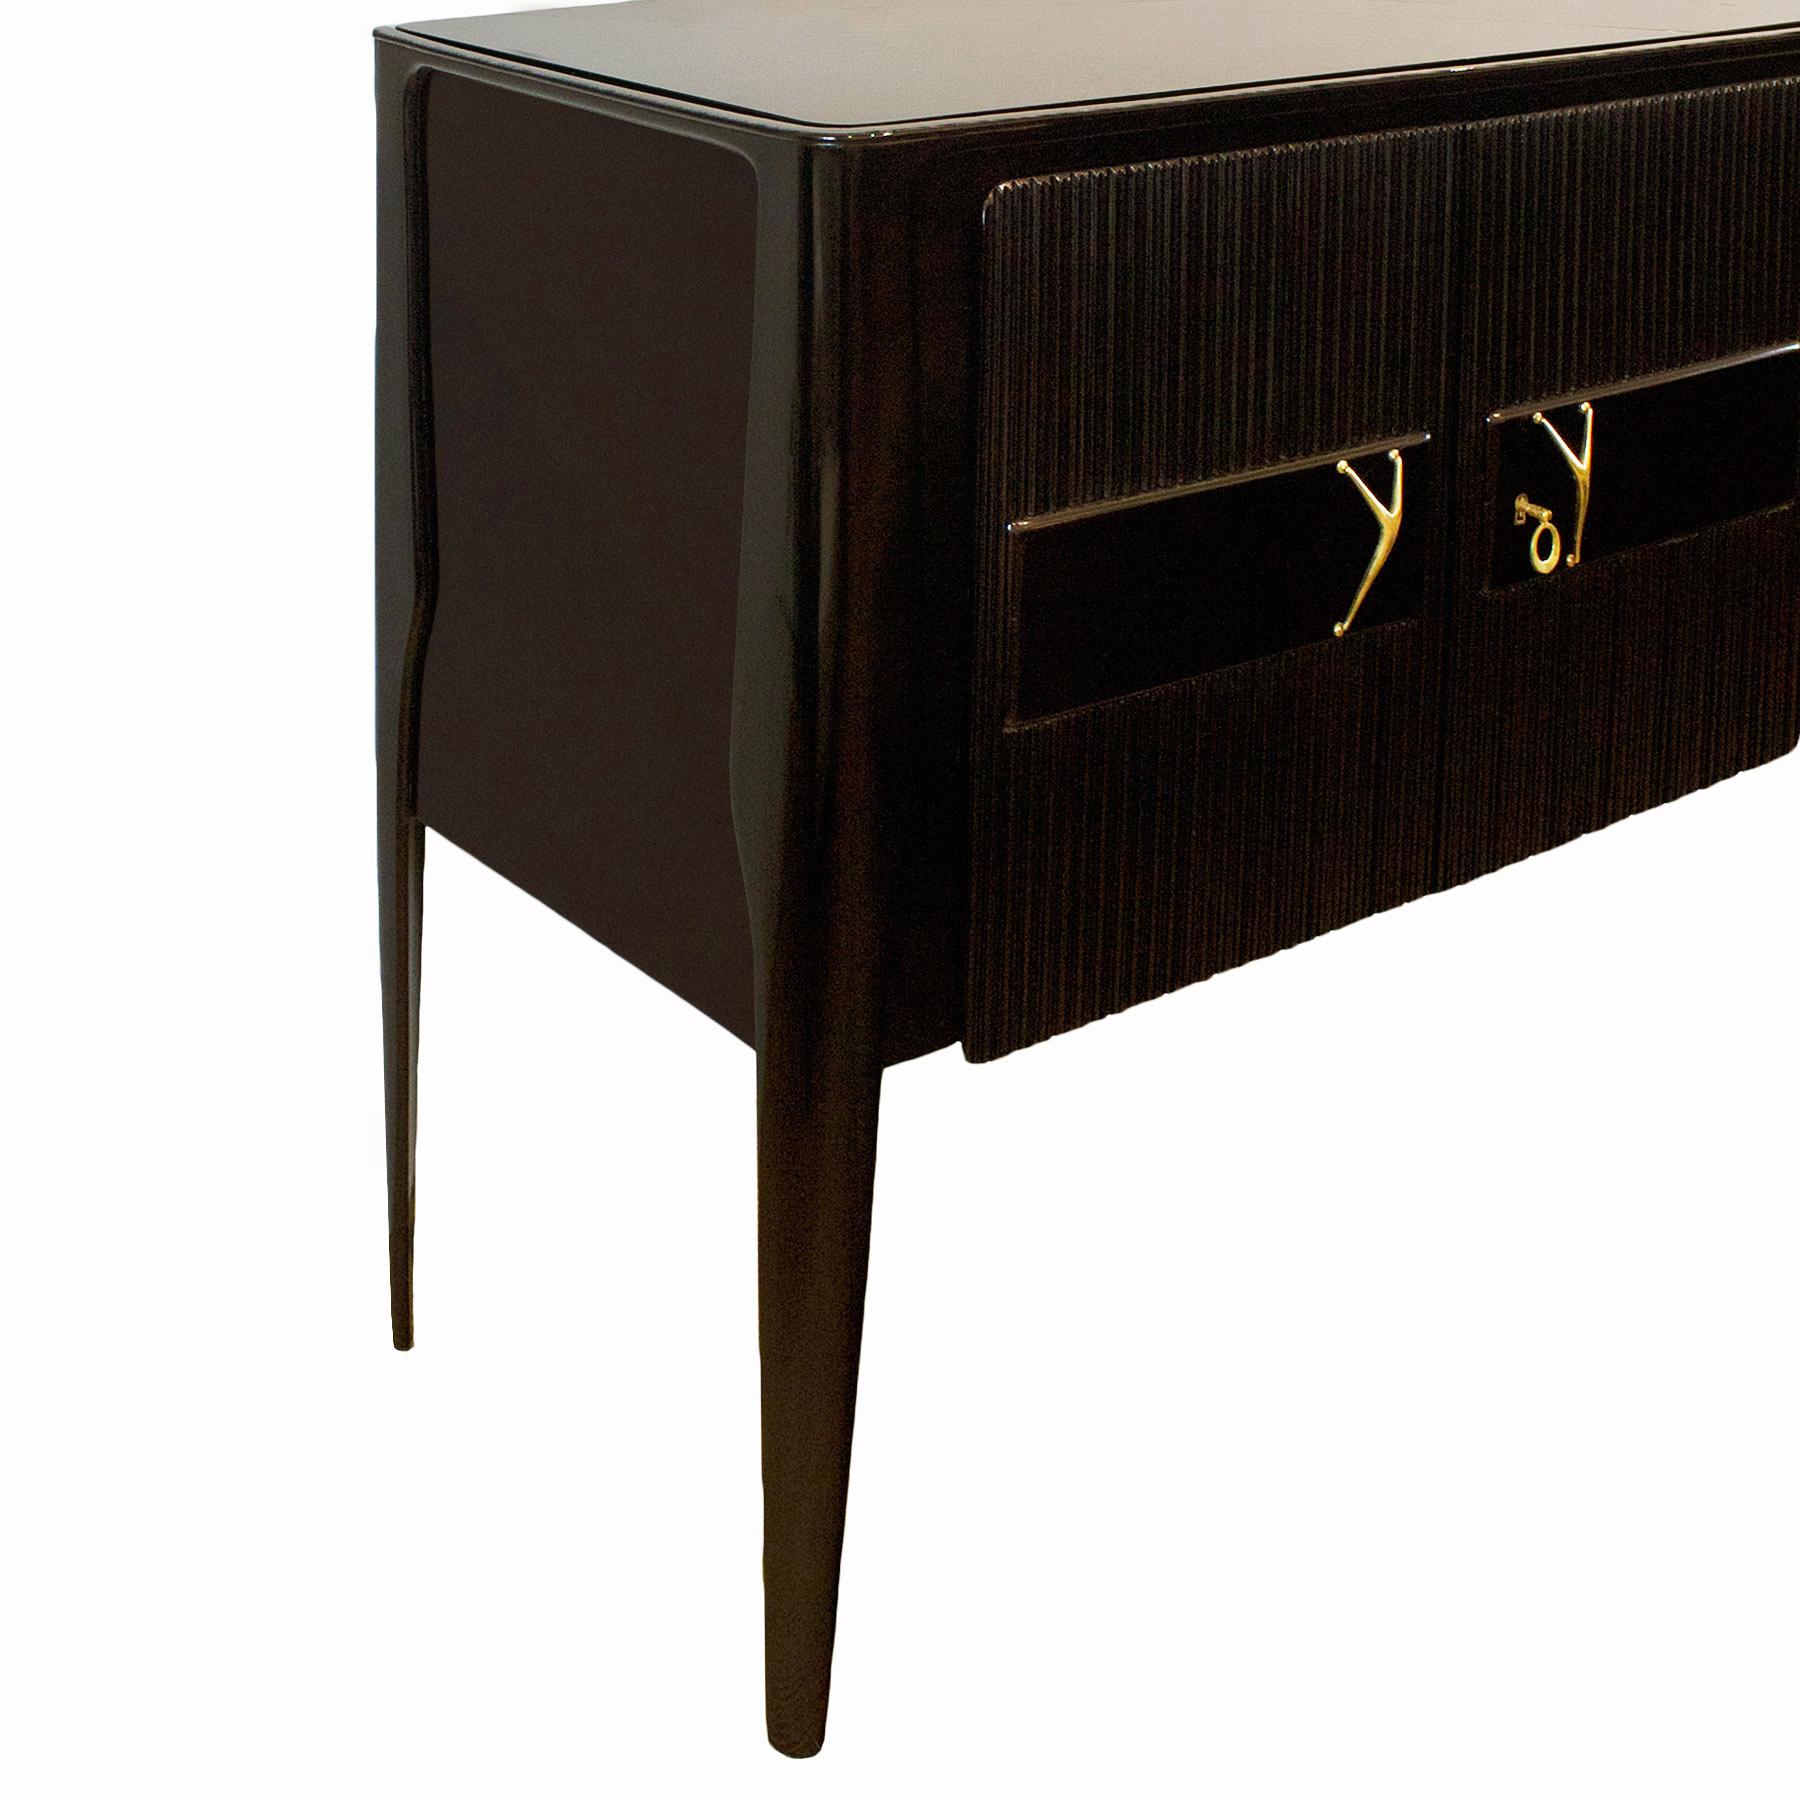 1945-1950 Sideboard in the Style of Ico Parisi, Mahogany, Bronze, Brass, Italy 1